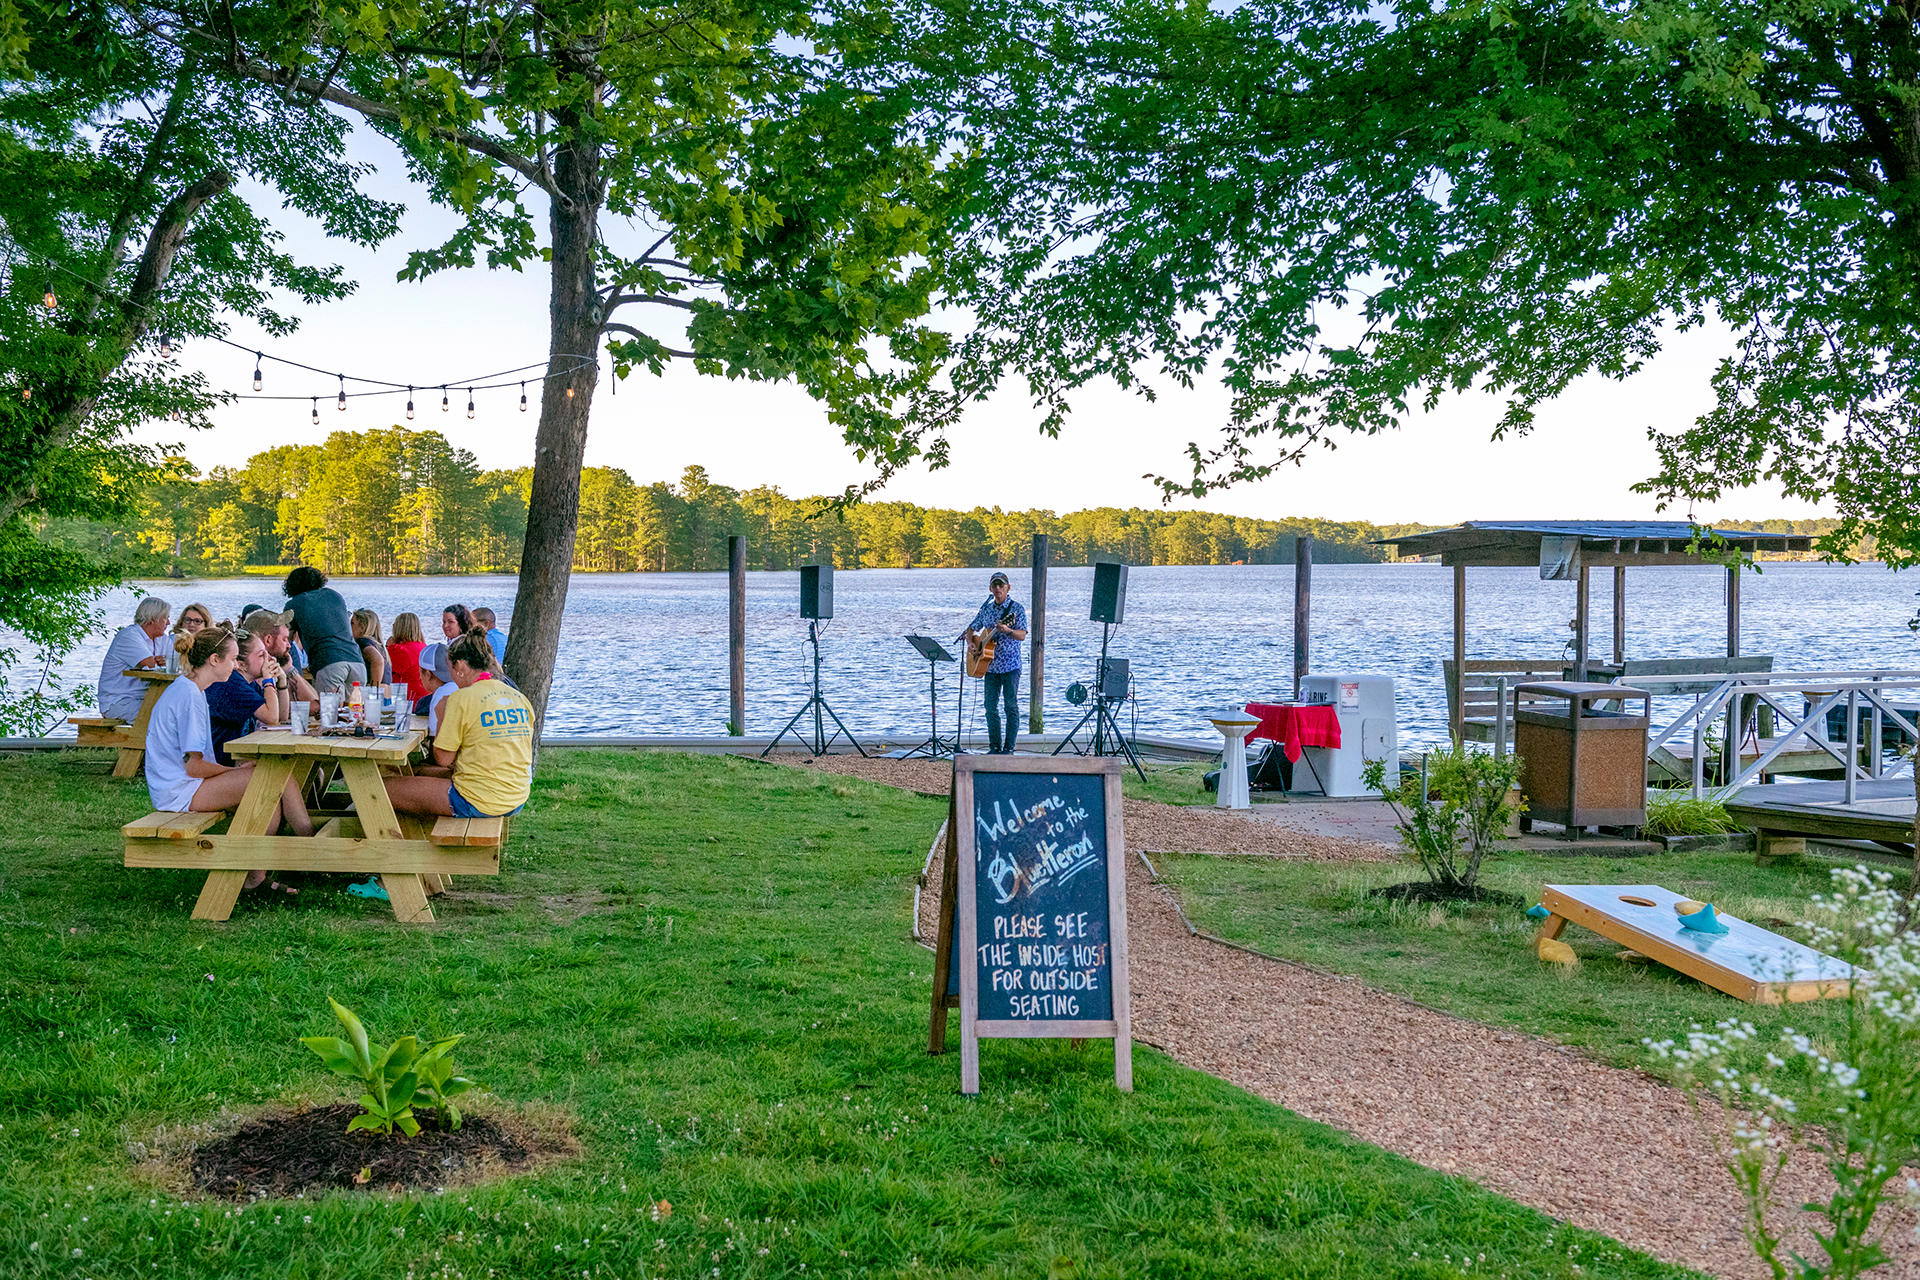 River's Rest Marina & Resort is located on the Chickahominy River in Charles City, VA.